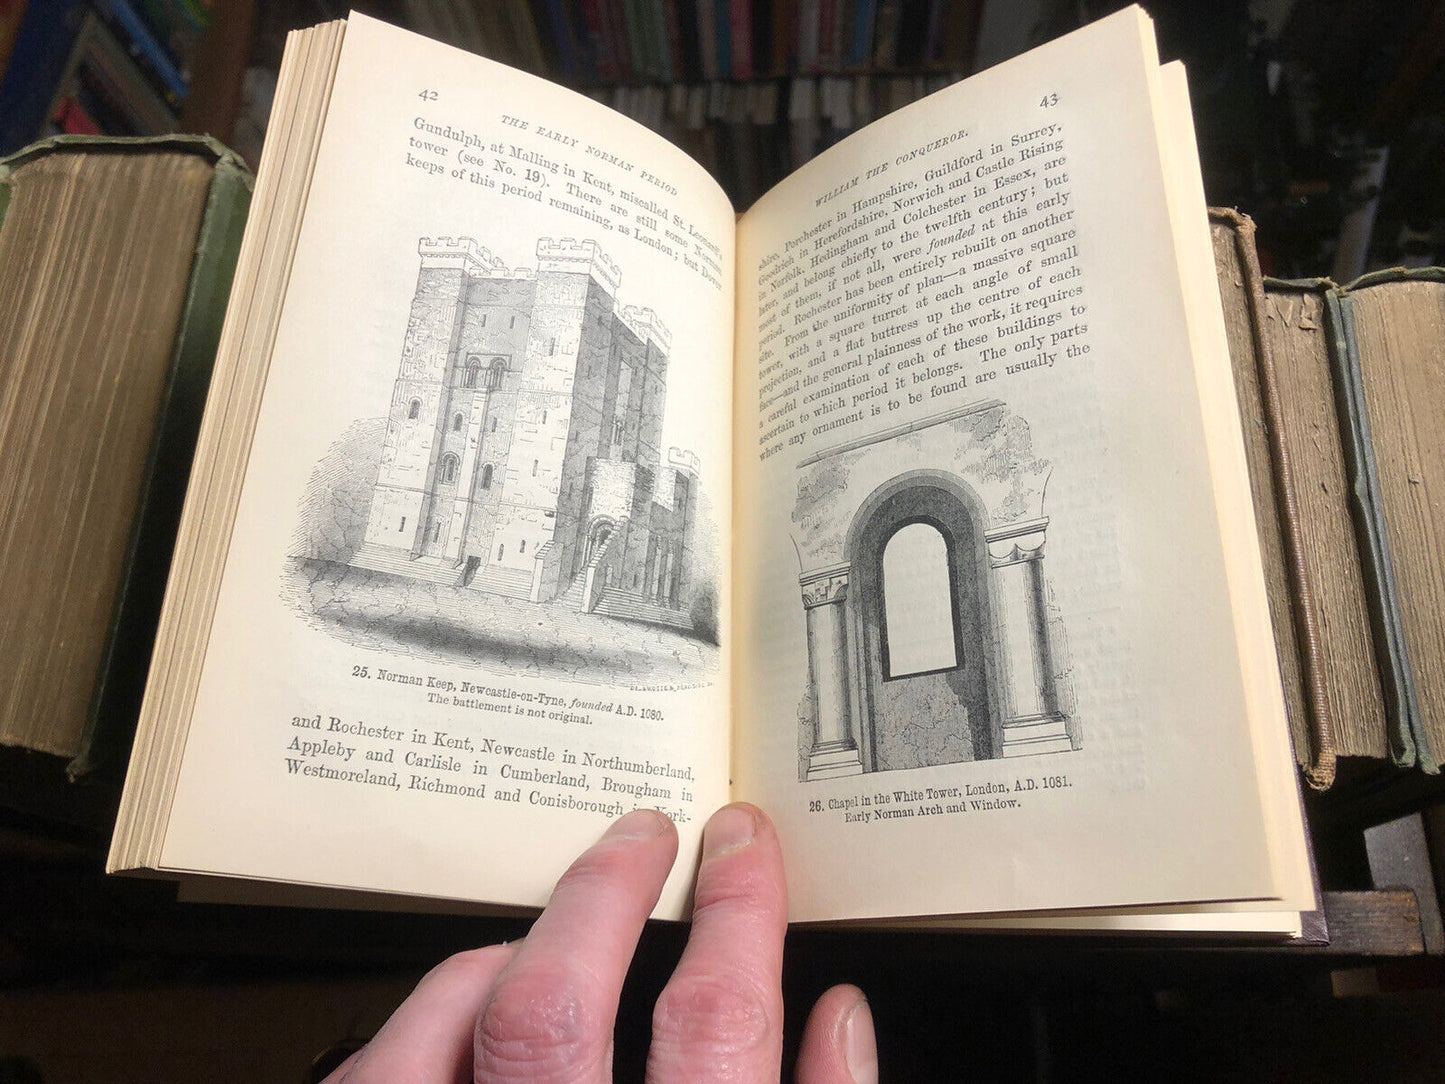 1906 Introduction to the Study of Gothic Architecture : John Henry Parker